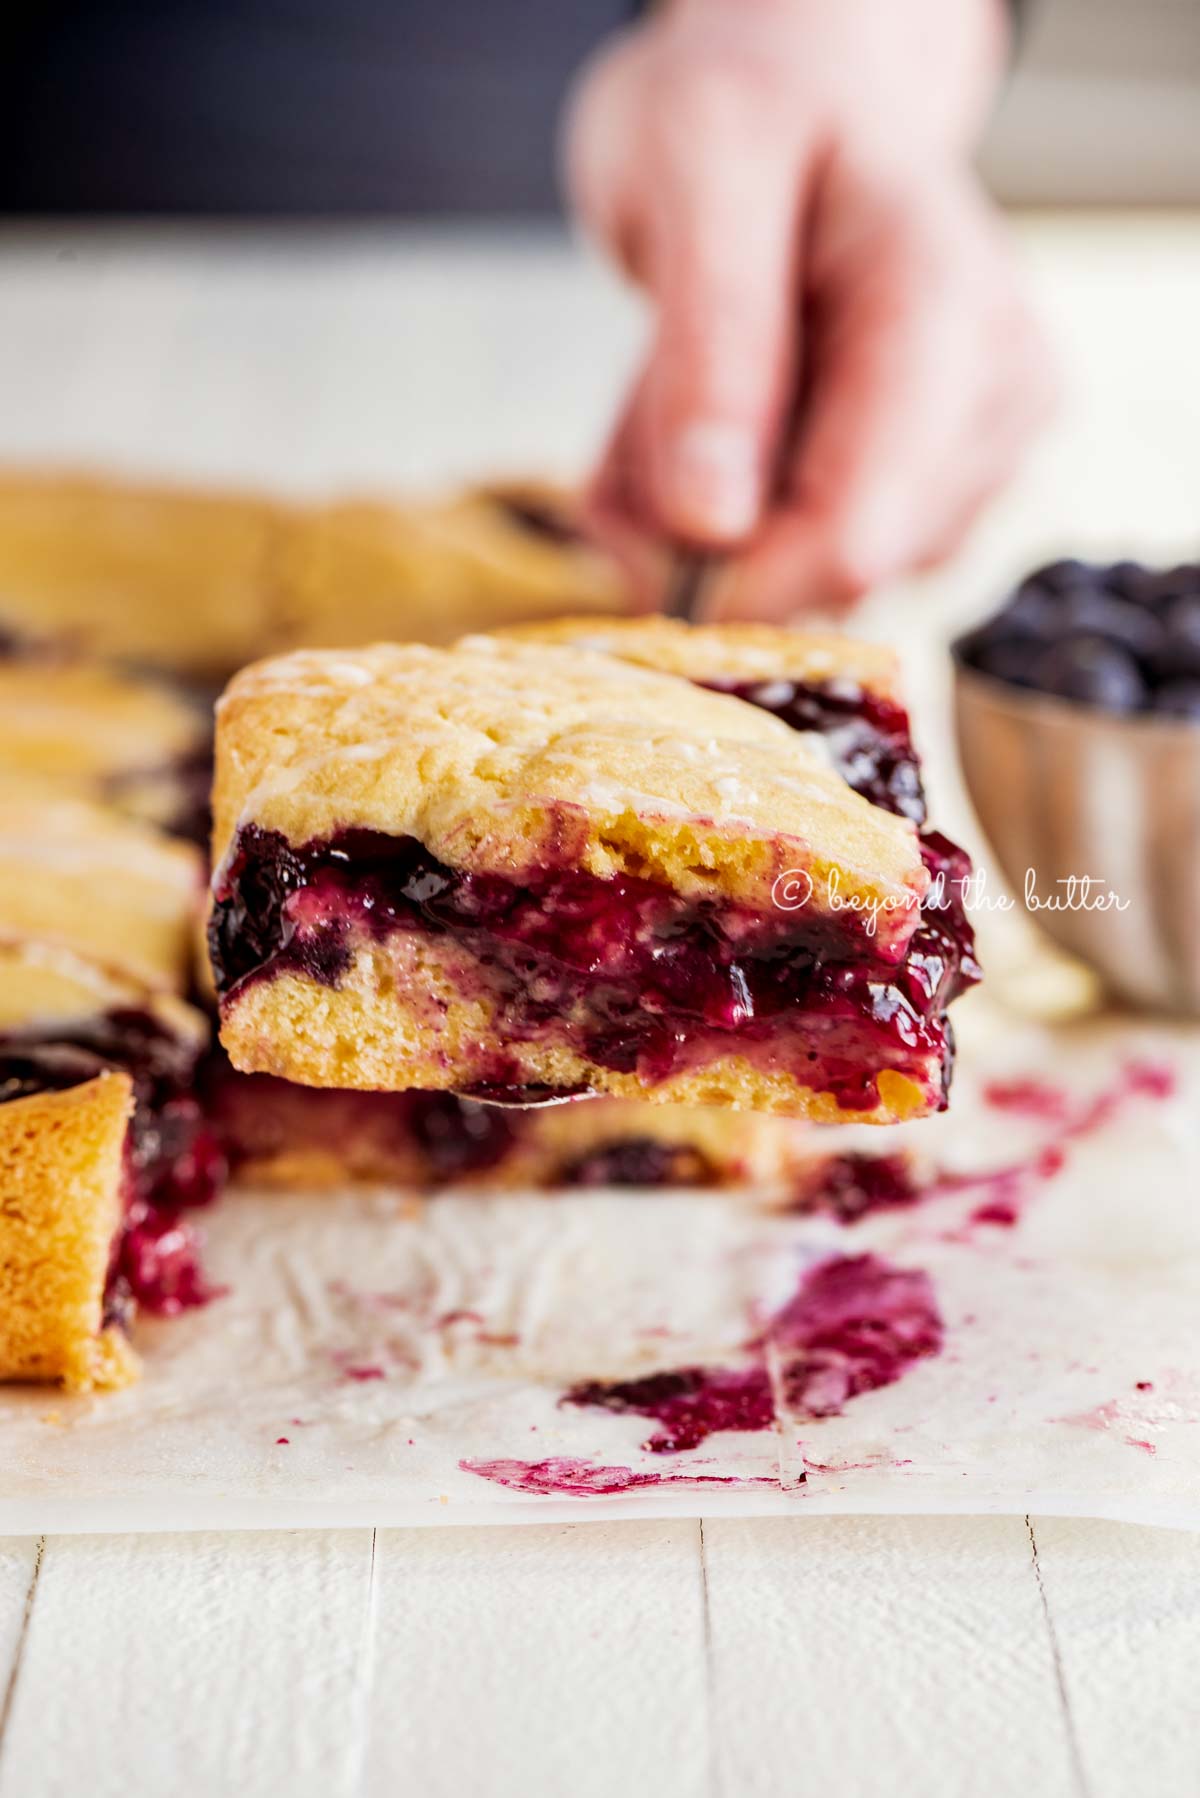 Serving a slice of freshly baked blueberry swirl coffee cake | All Images © Beyond the Butter®